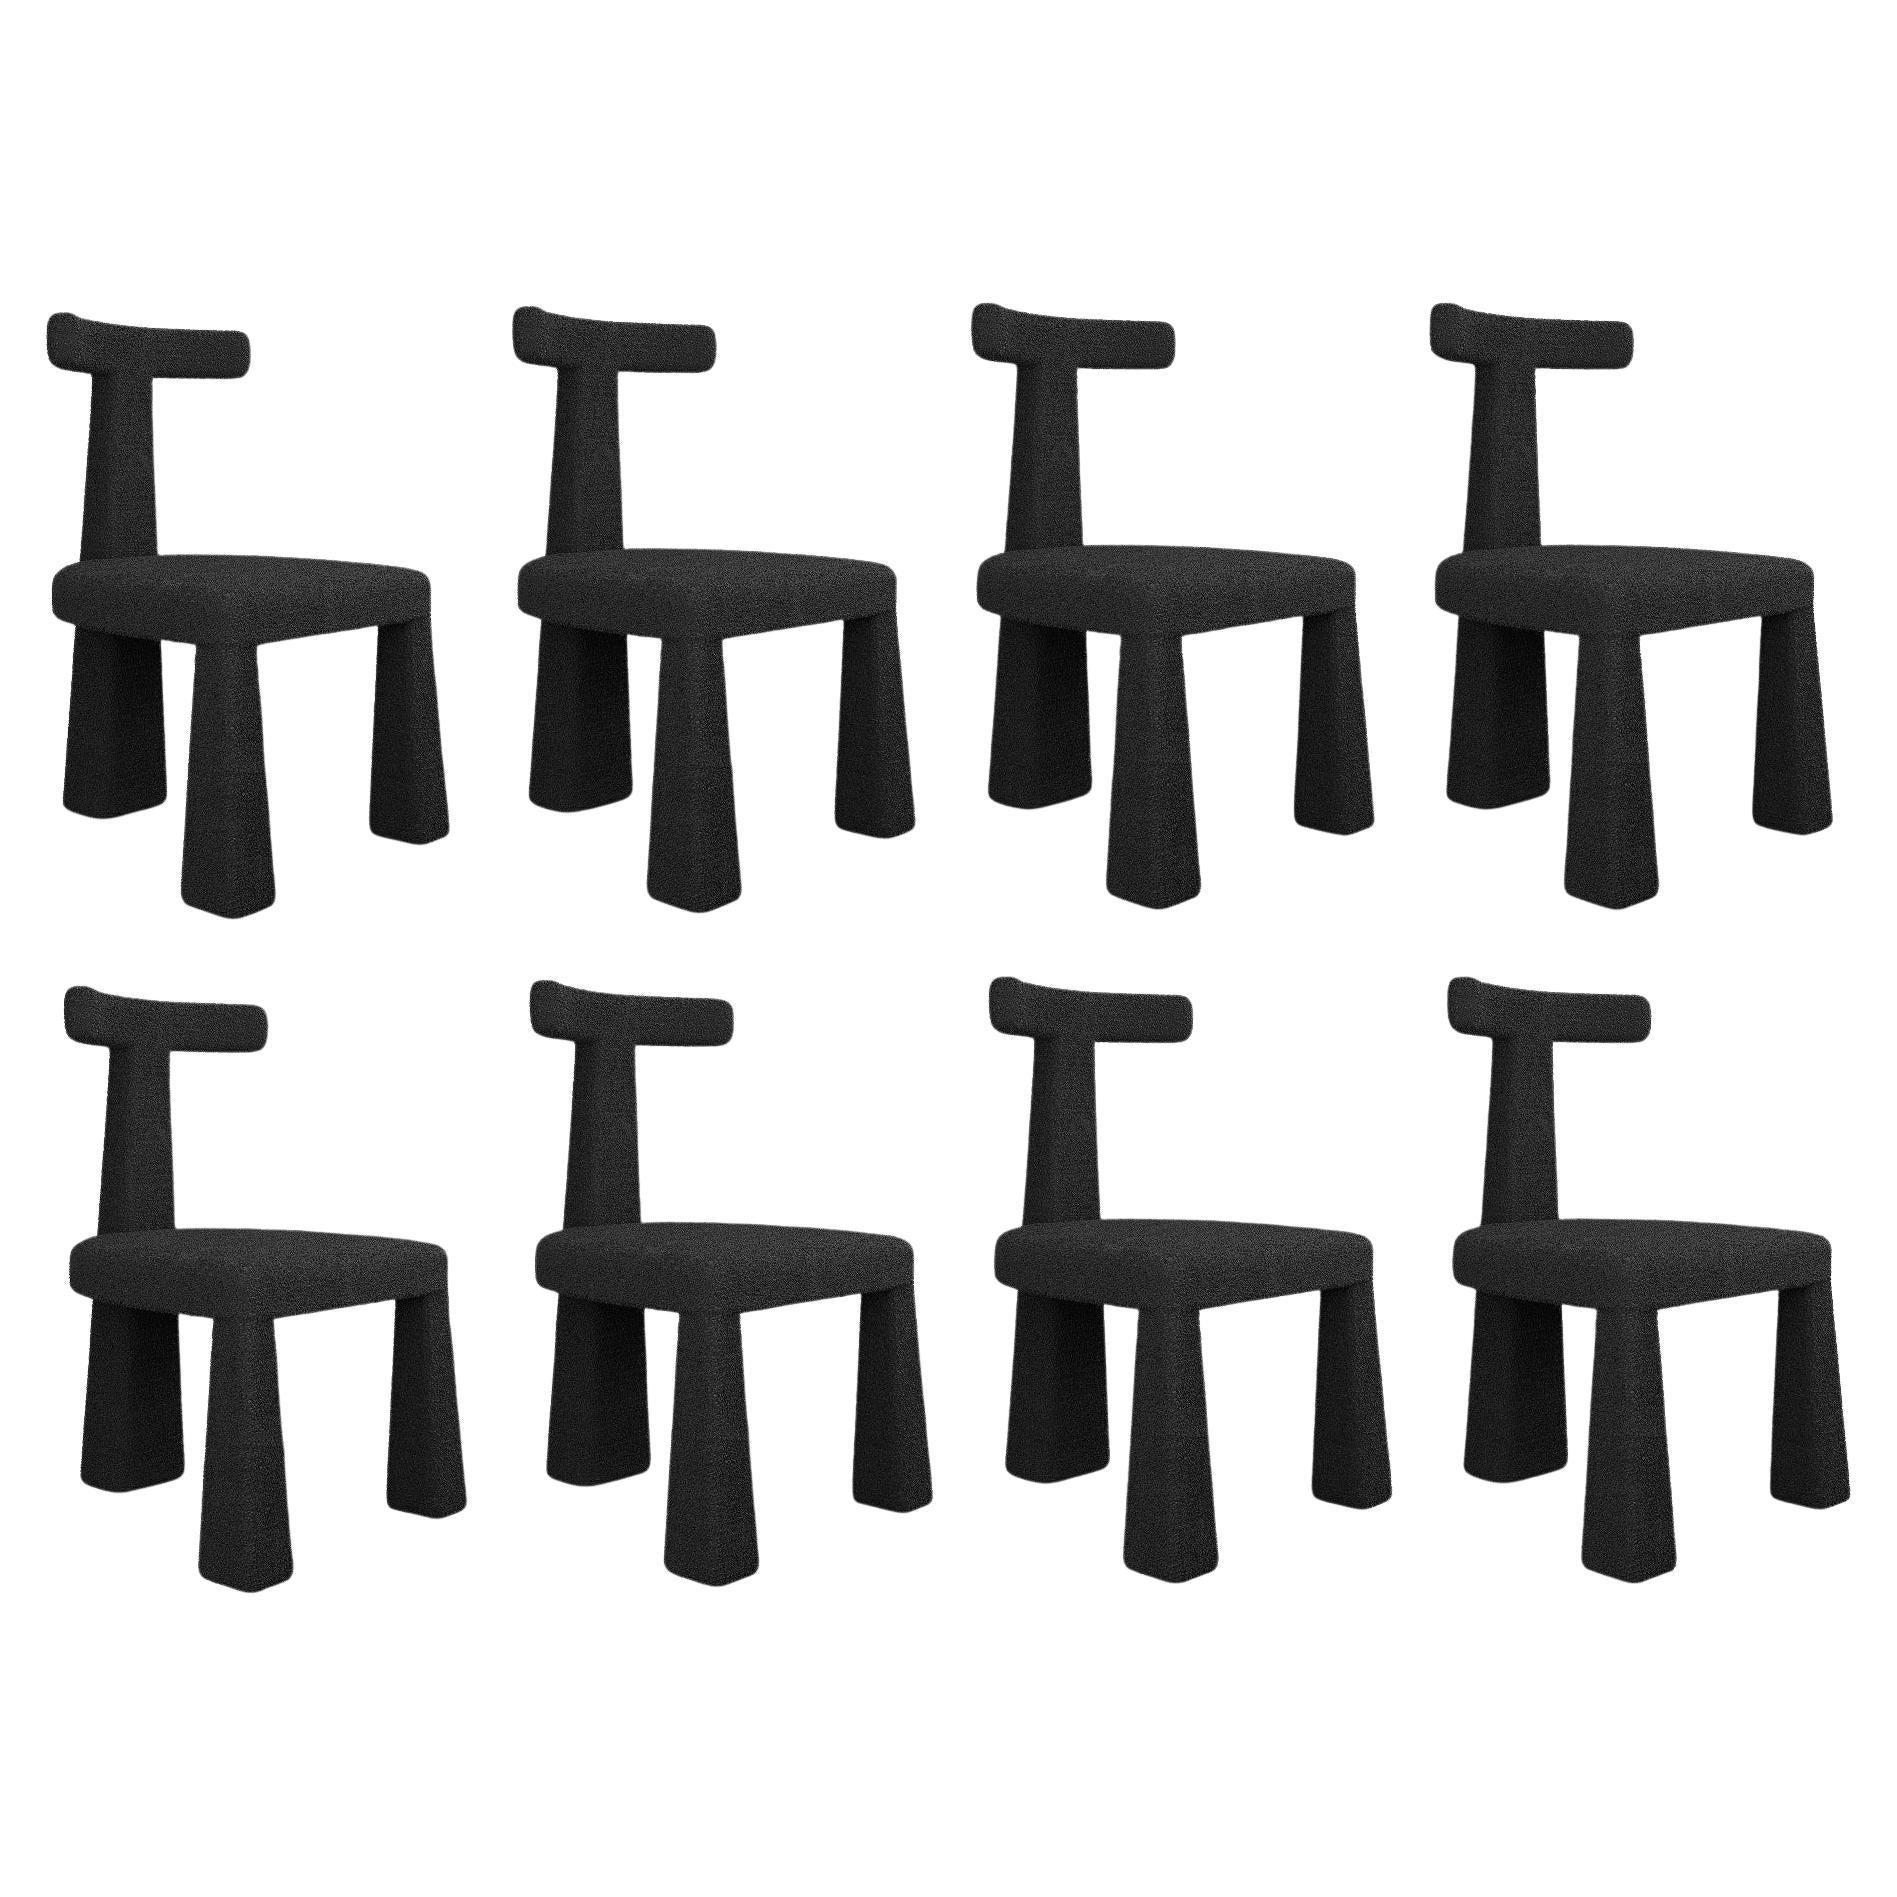 Contemporary Dining Chairs Featuring Minimalist Design with Three Legs-Set of 8